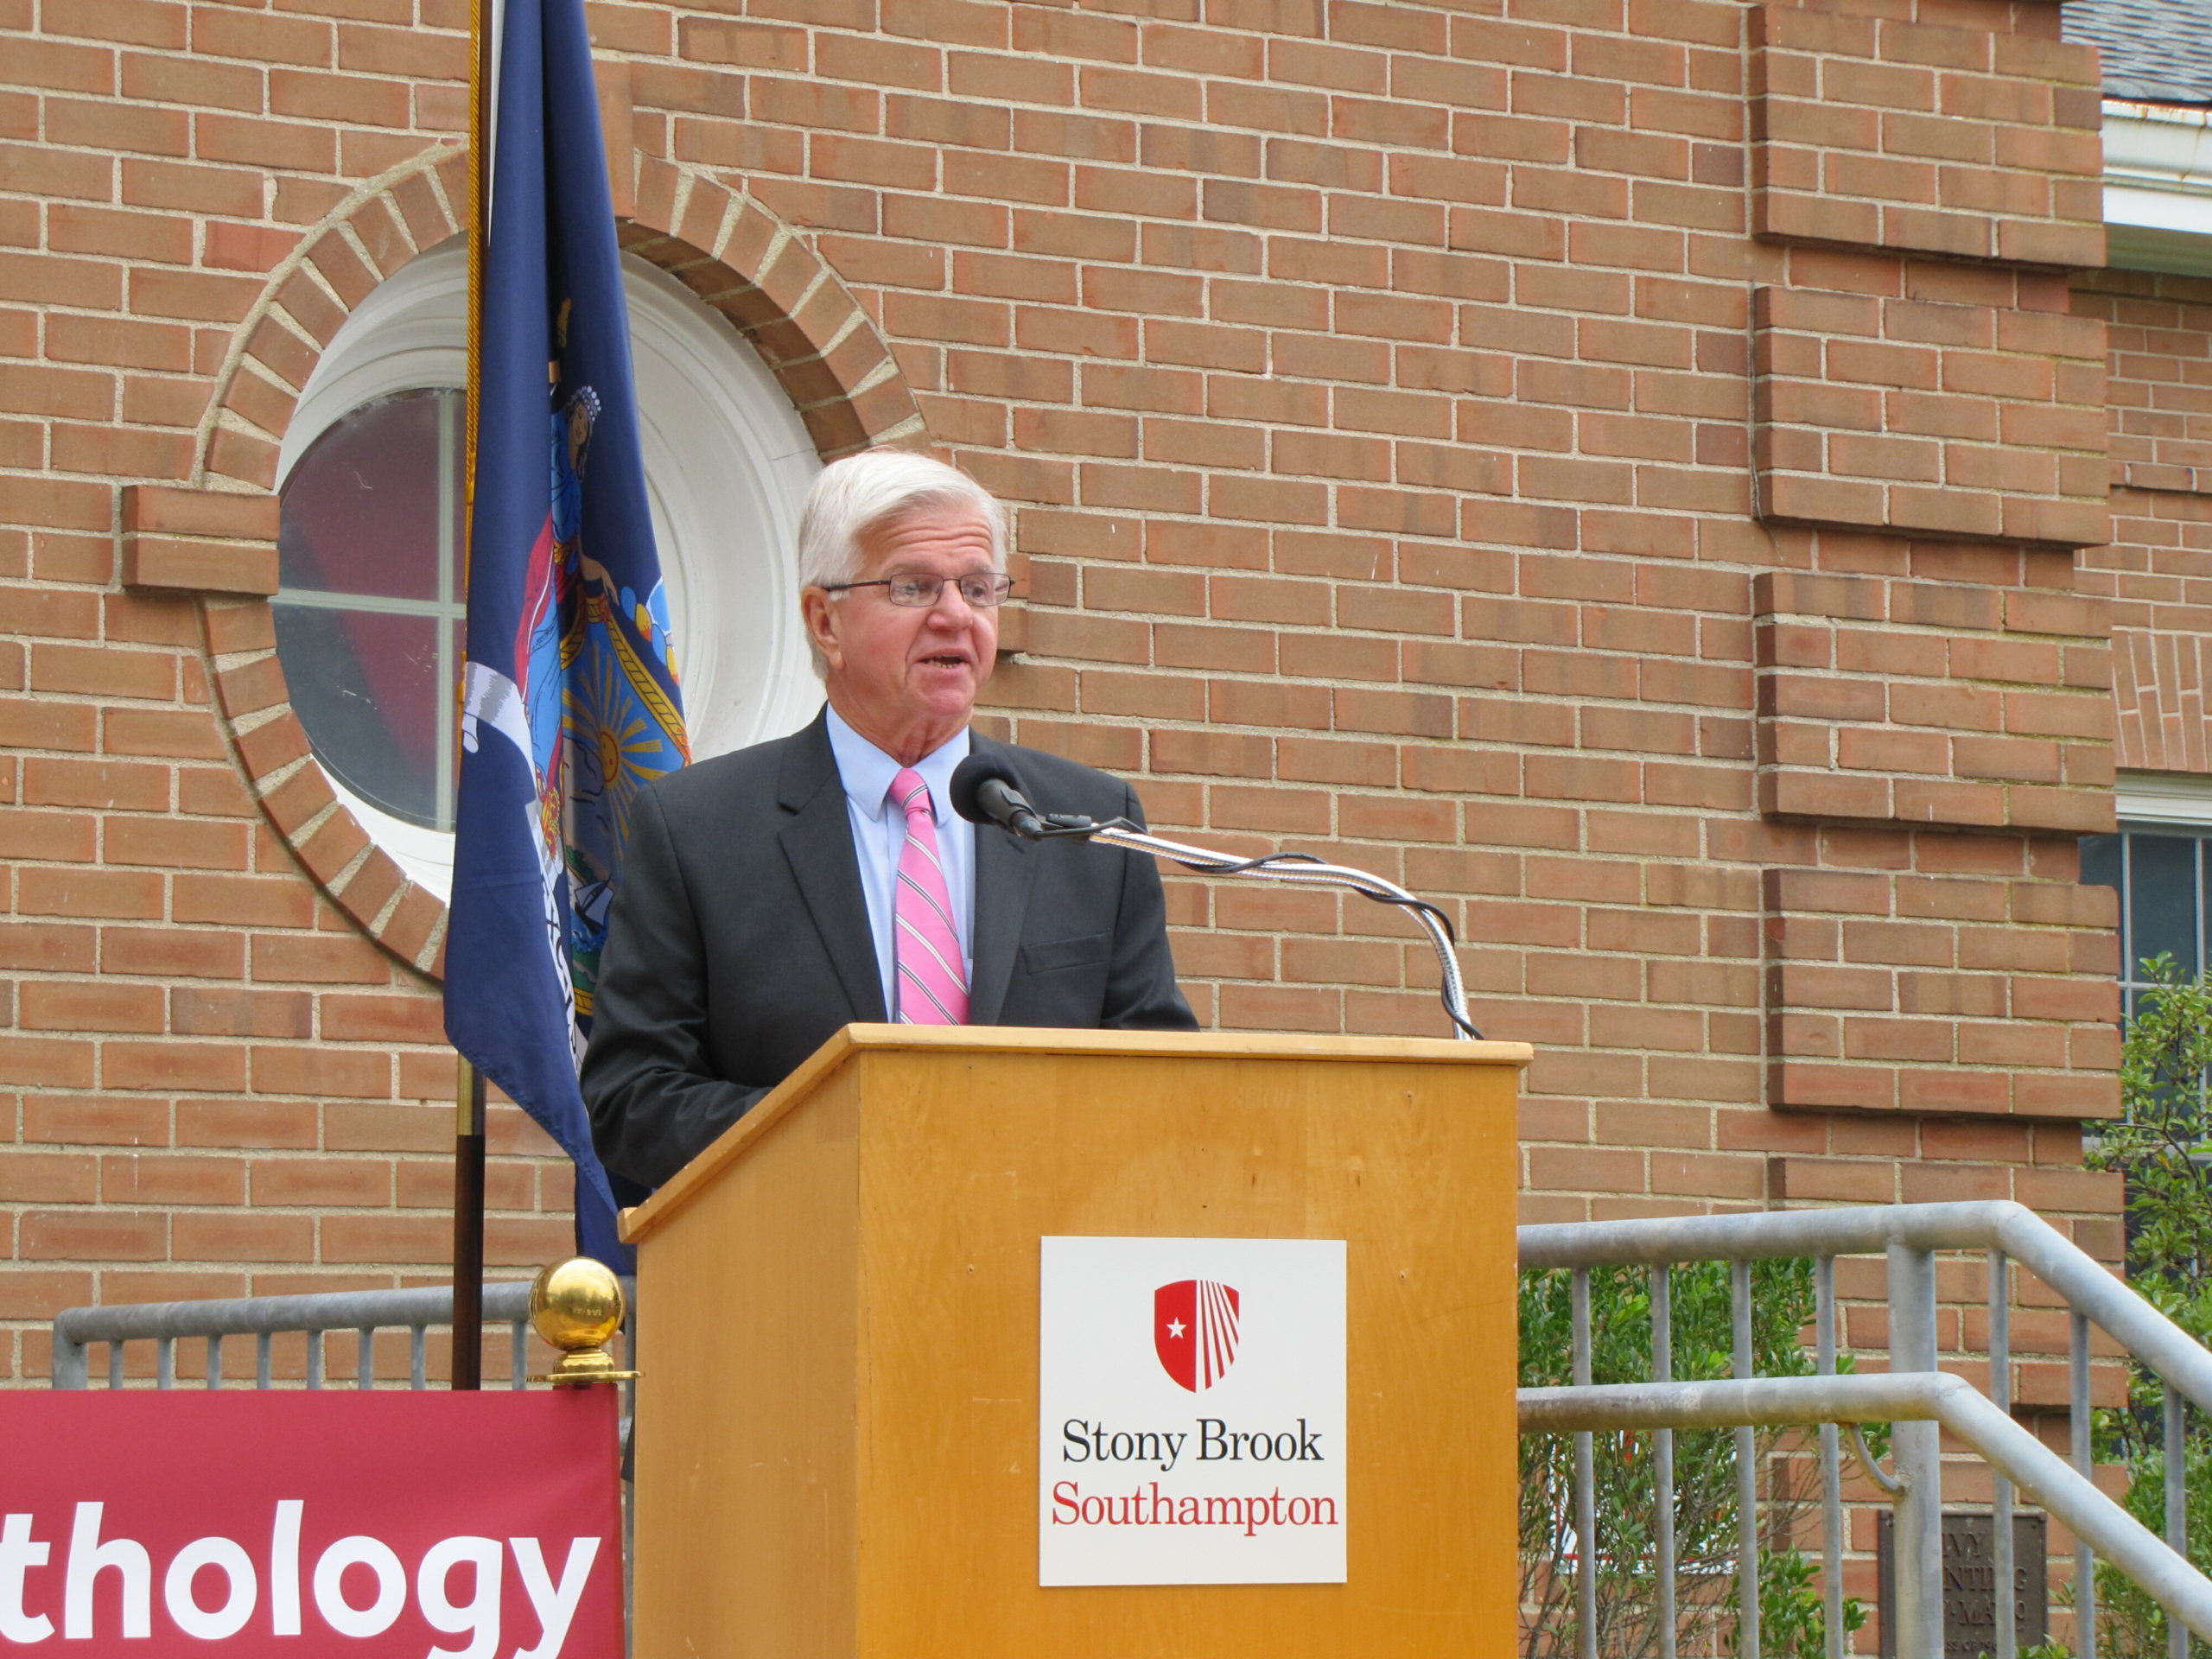 State Assemblyman Fred W. Thiele Jr. spoke as Stony Brook University officially opened its Speech-Language Patholgy Program's new center in the Atlantic Building at the Stony Brook Southampton campus on Friday.